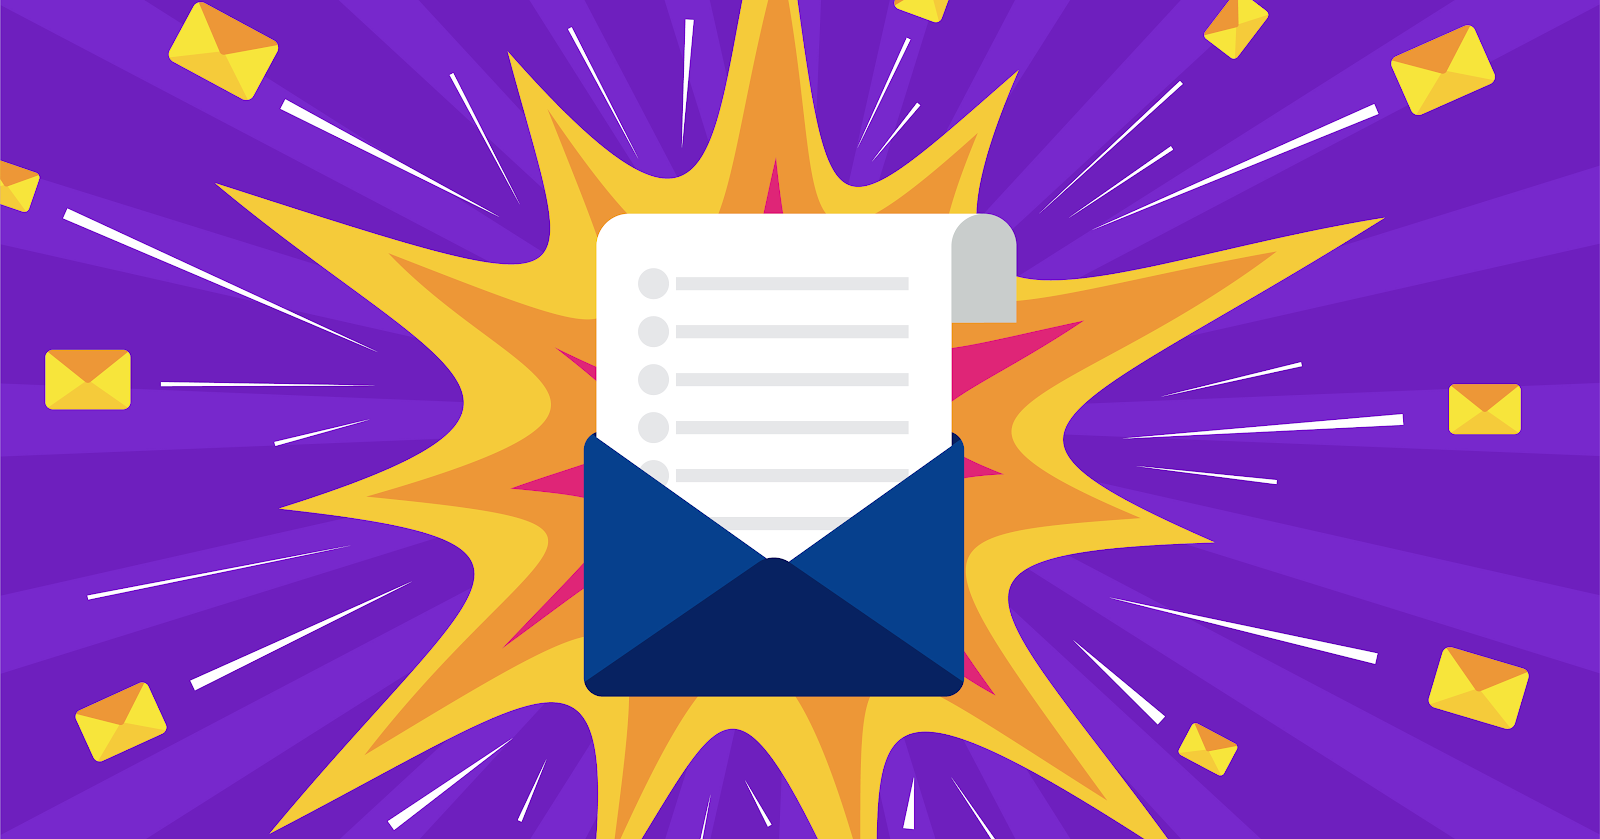 10-proven-email-blast-examples-with-open-and-click-rate-data